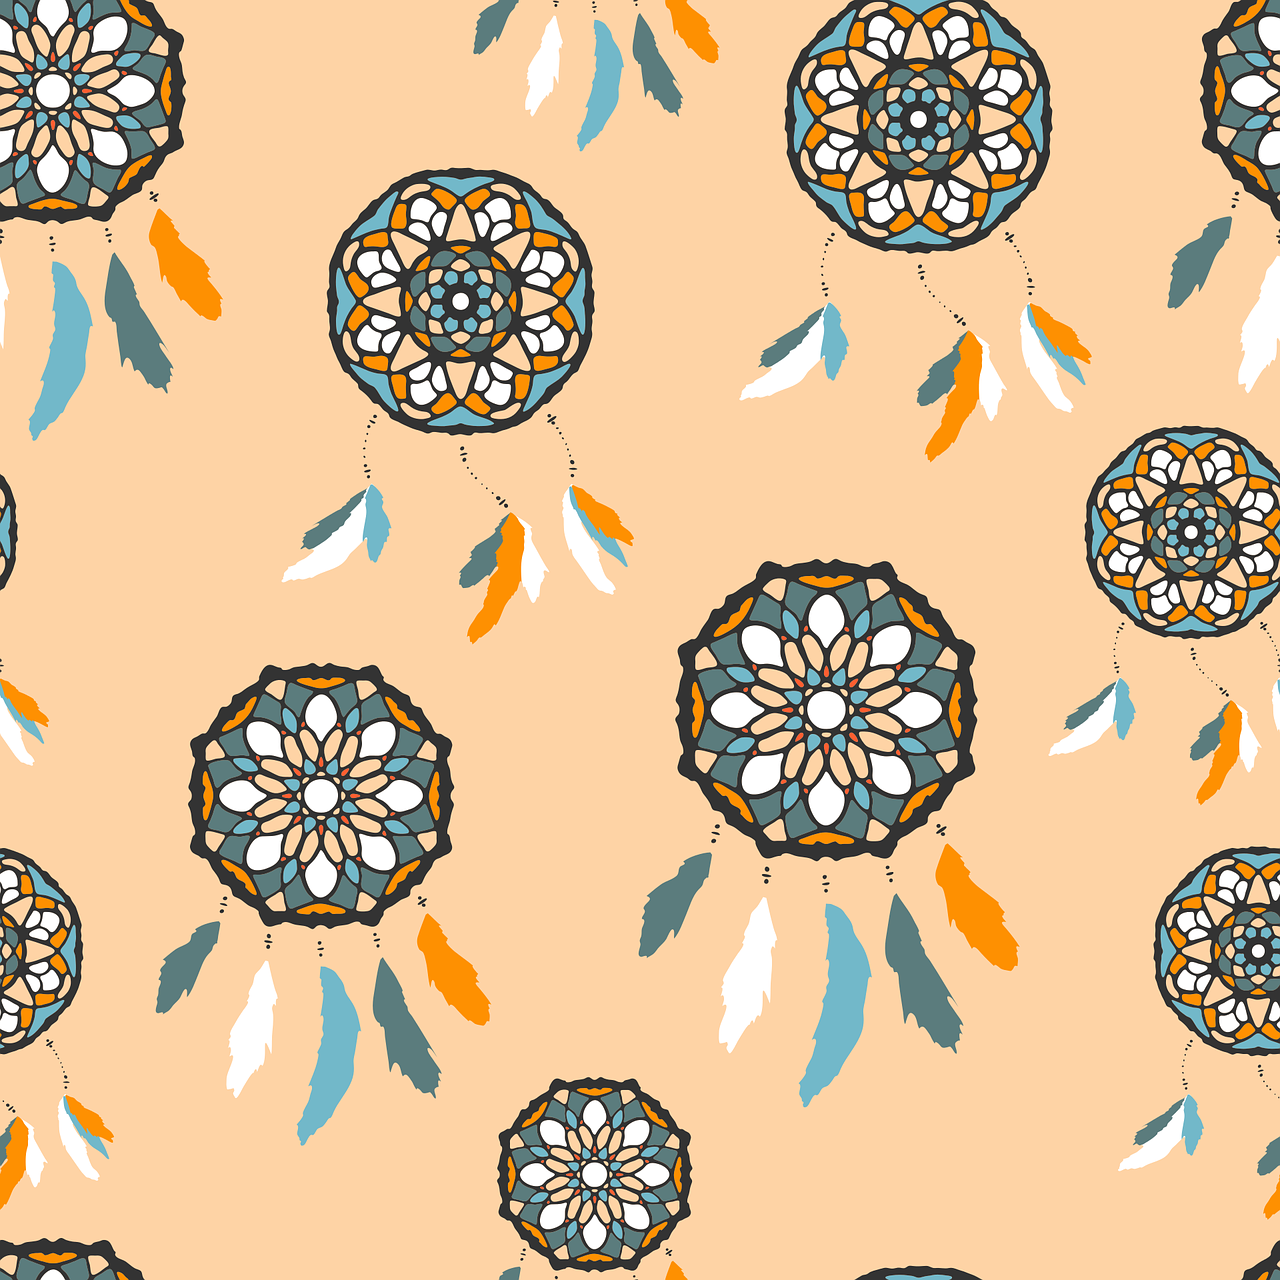 a pattern of dream catchers and feathers on a beige background, shutterstock, arabesque, orange and turquoise, repeating patterns, cut, anime screenshot pattern